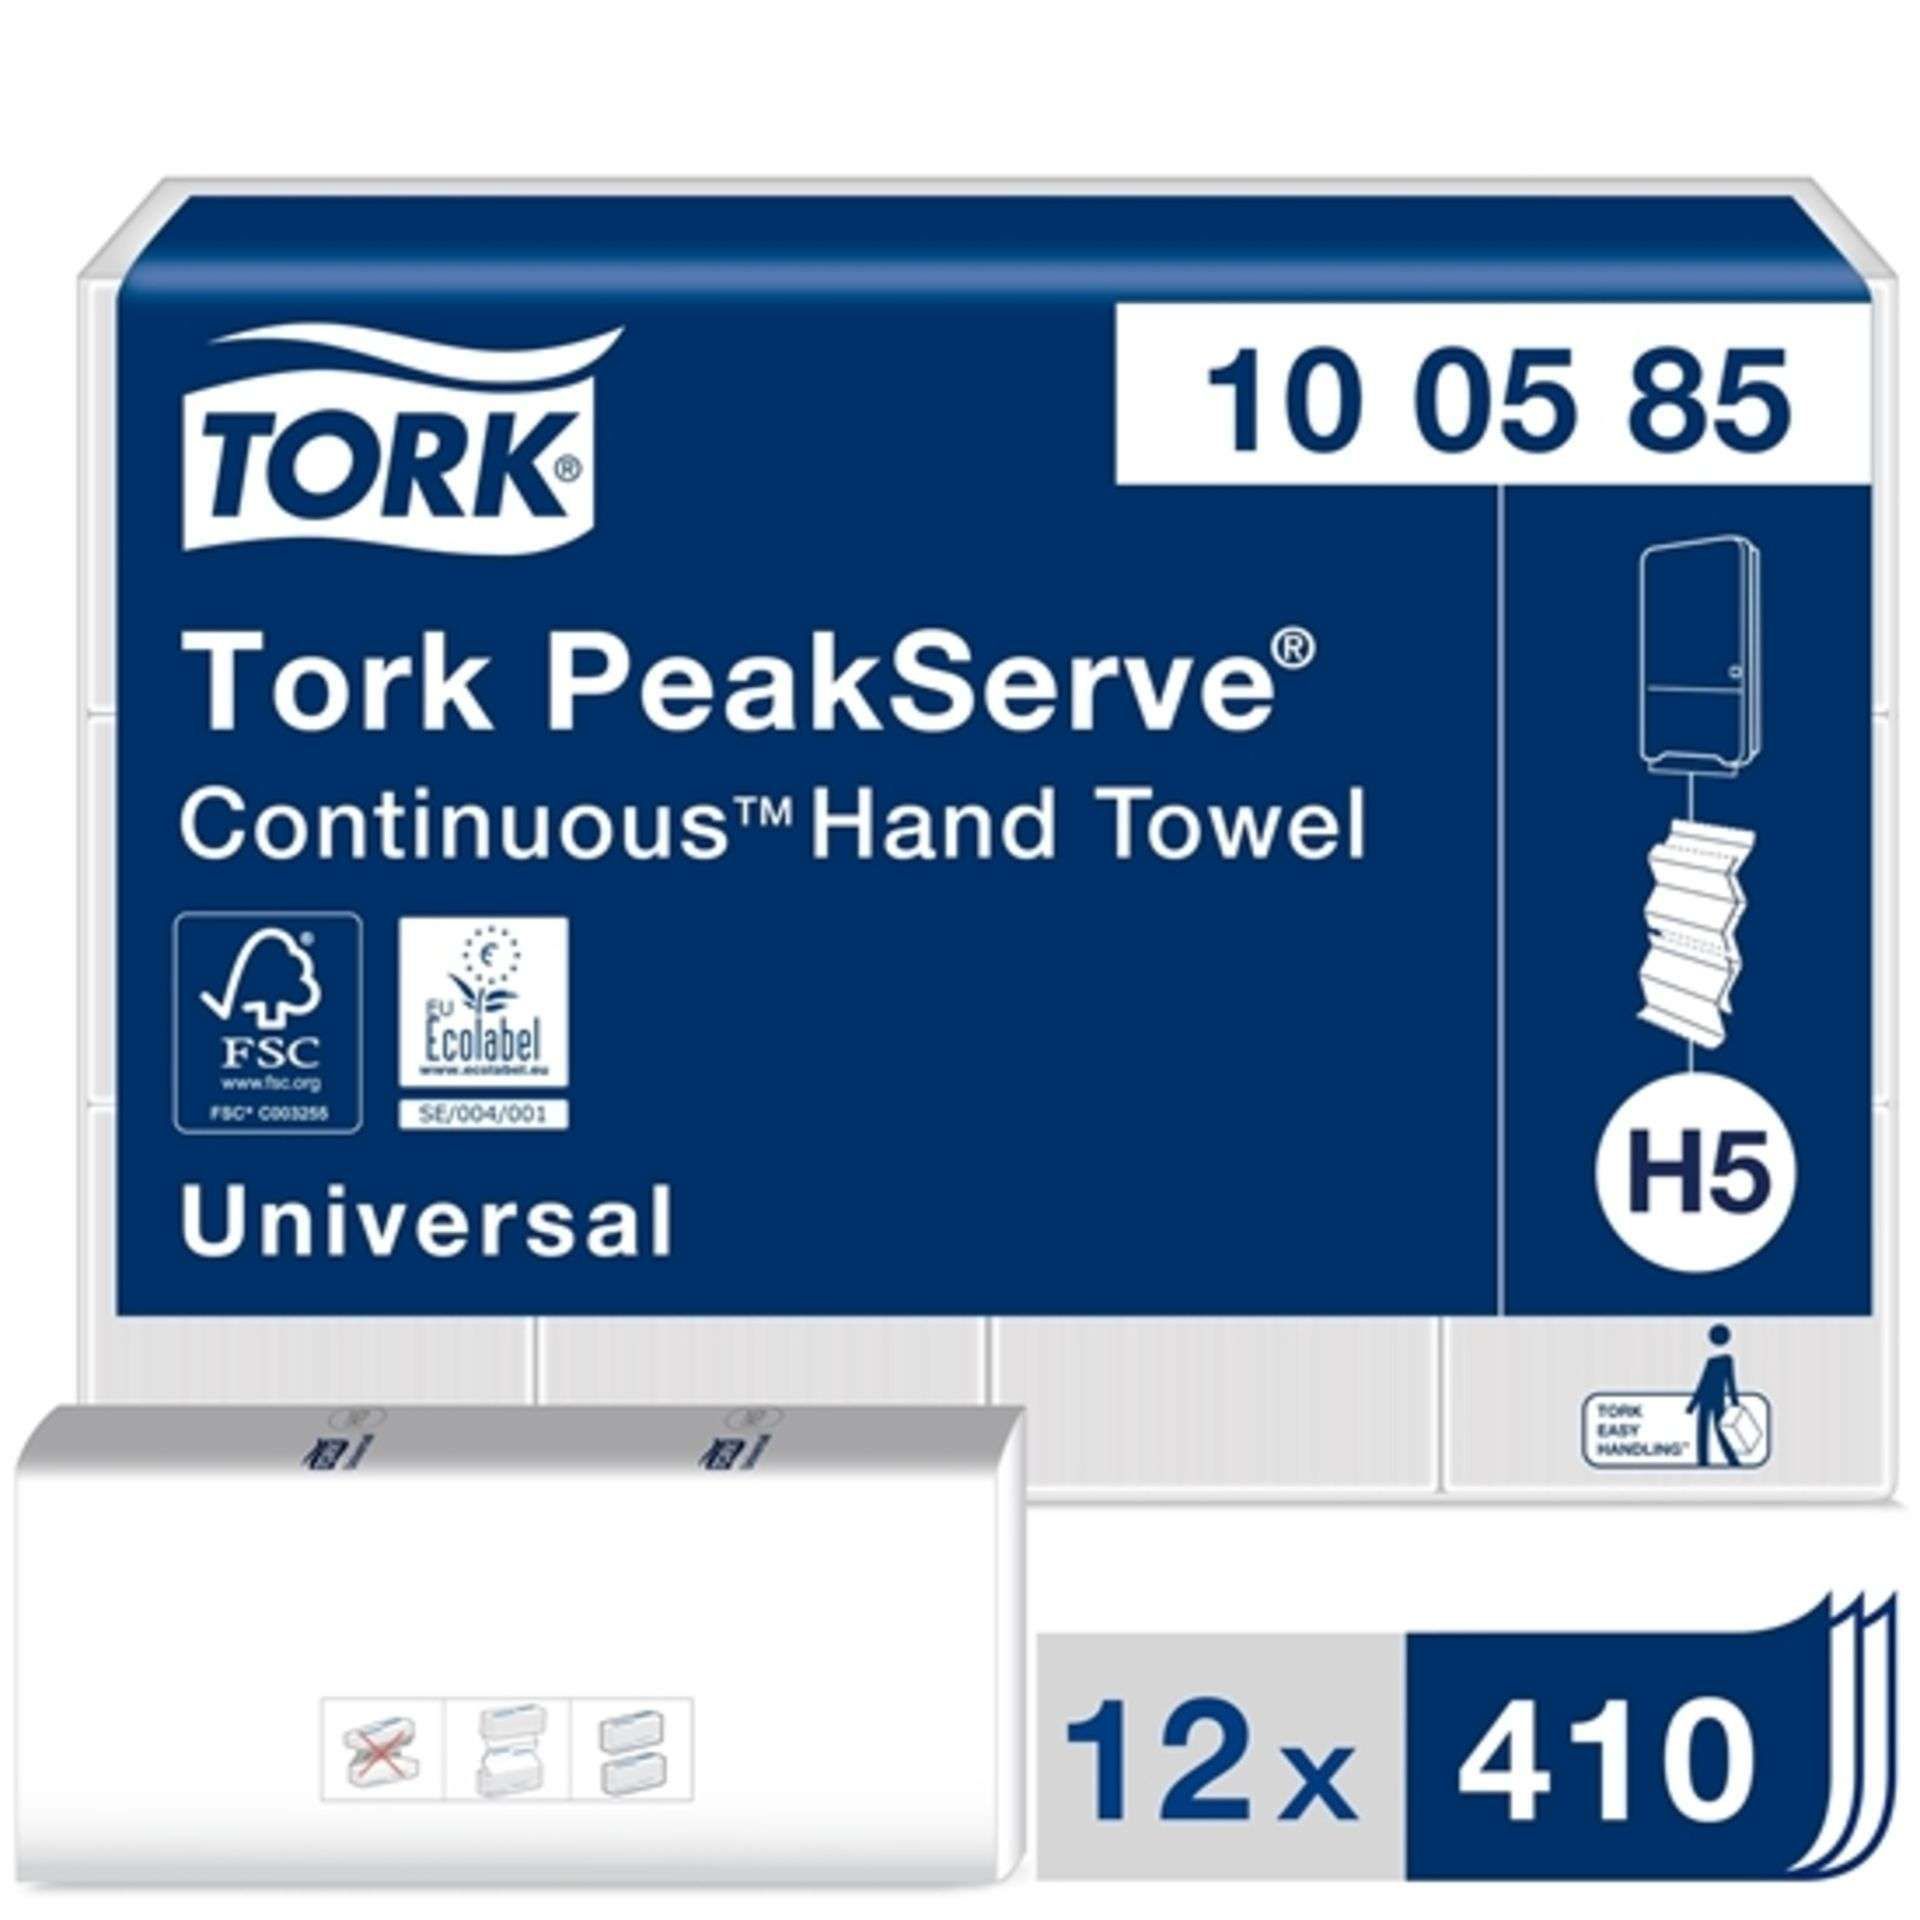 4 X TORK PEAKSERVE 100585 CONTINUOS HAND TOWELS R9.3